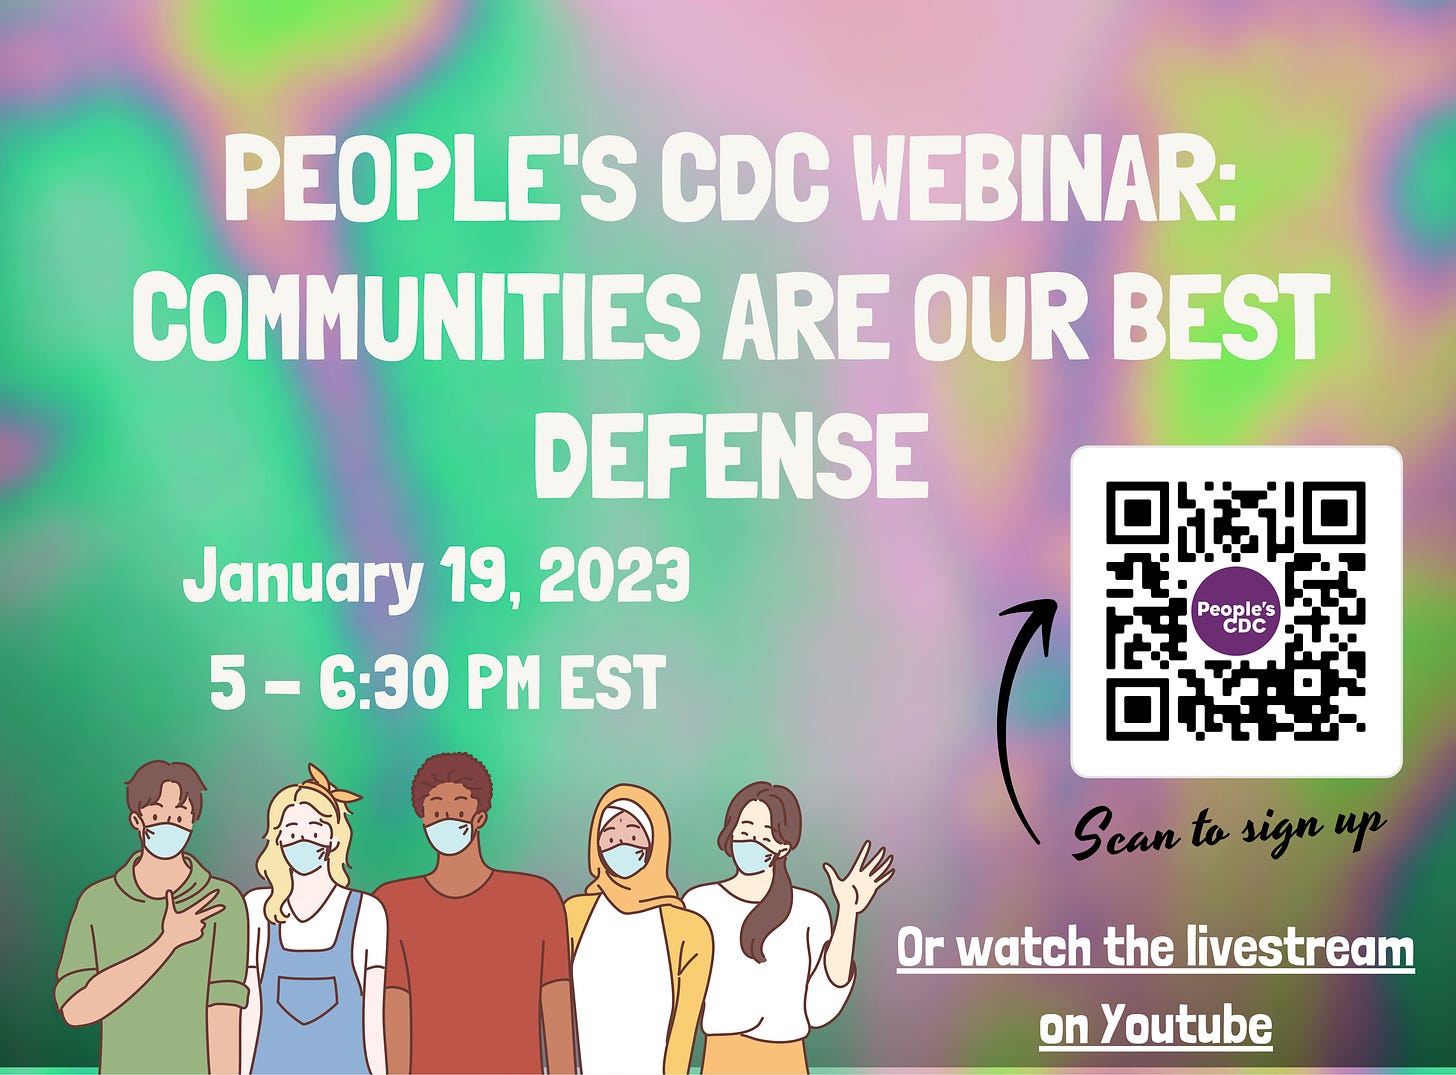 Illustration depicts a group of five young adults with varying skin tones and genders with masks, some waving or motioning to the viewer. Title and subtitle read: “People’s CDC Webinar: Communities Are Our Best Defense”. Date and time read: “January 19, 2023, 5 to 6:30PM EST”. A scannable QR code appears in the lower right.